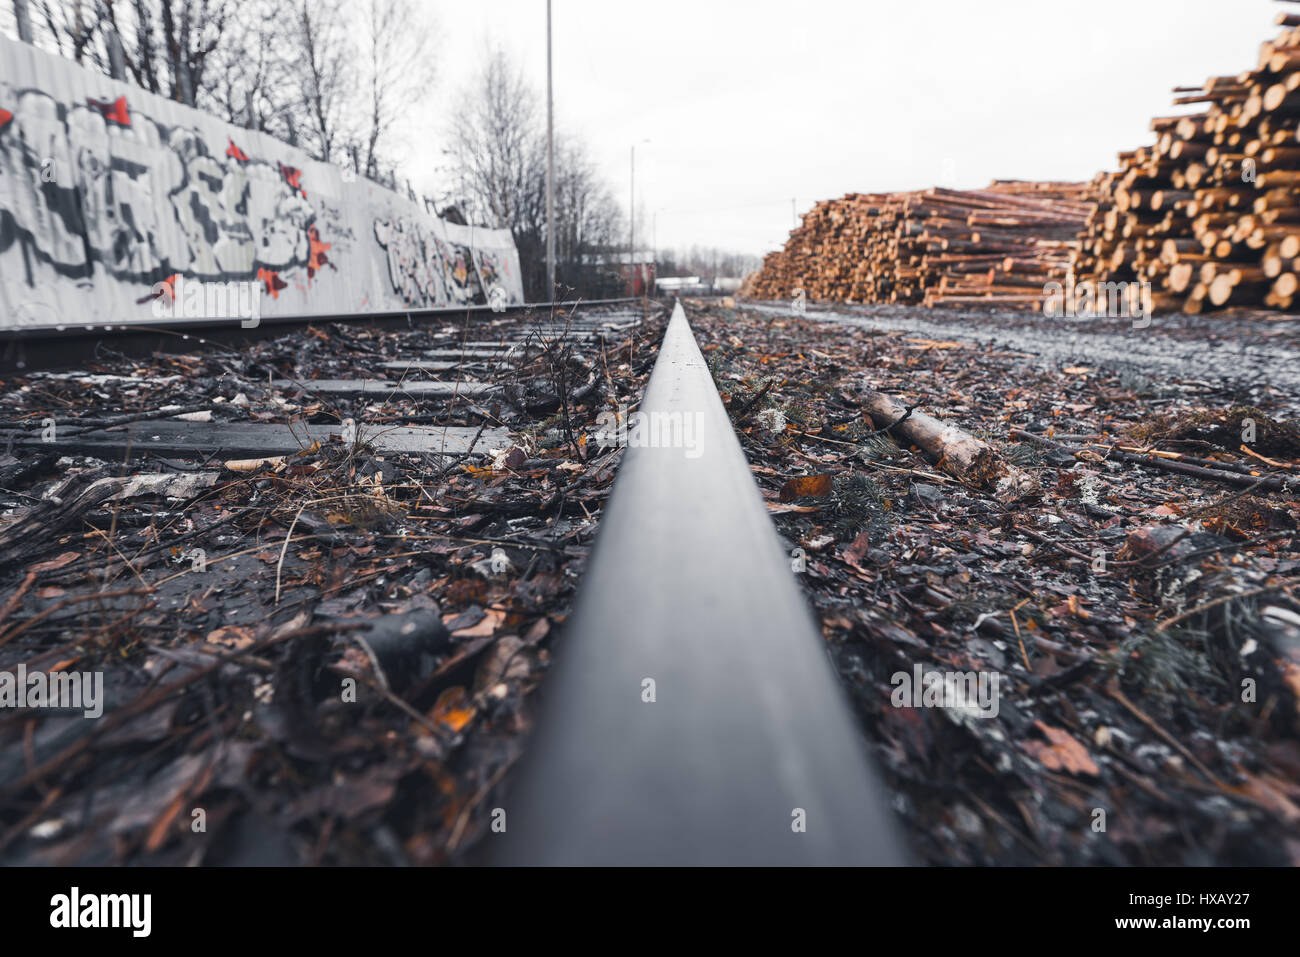 Wide and low angle view of railroad track covered by debris dividing blurred metal wall and pile of wood on overcast and wet day Stock Photo